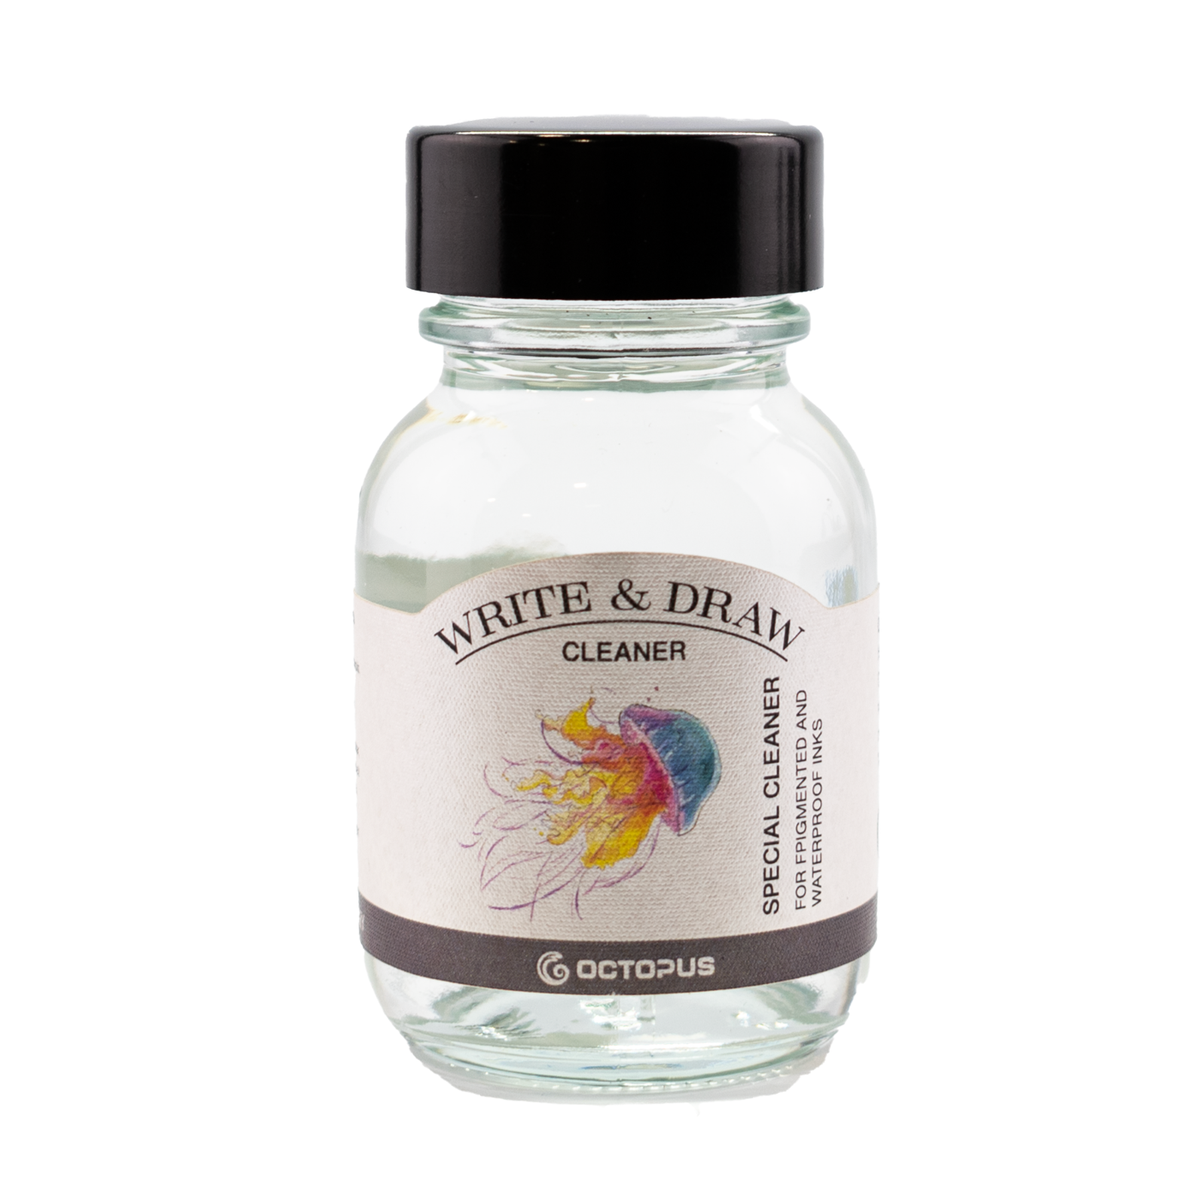 Octopus Special Cleaner for write and draw inks, pigmented inks